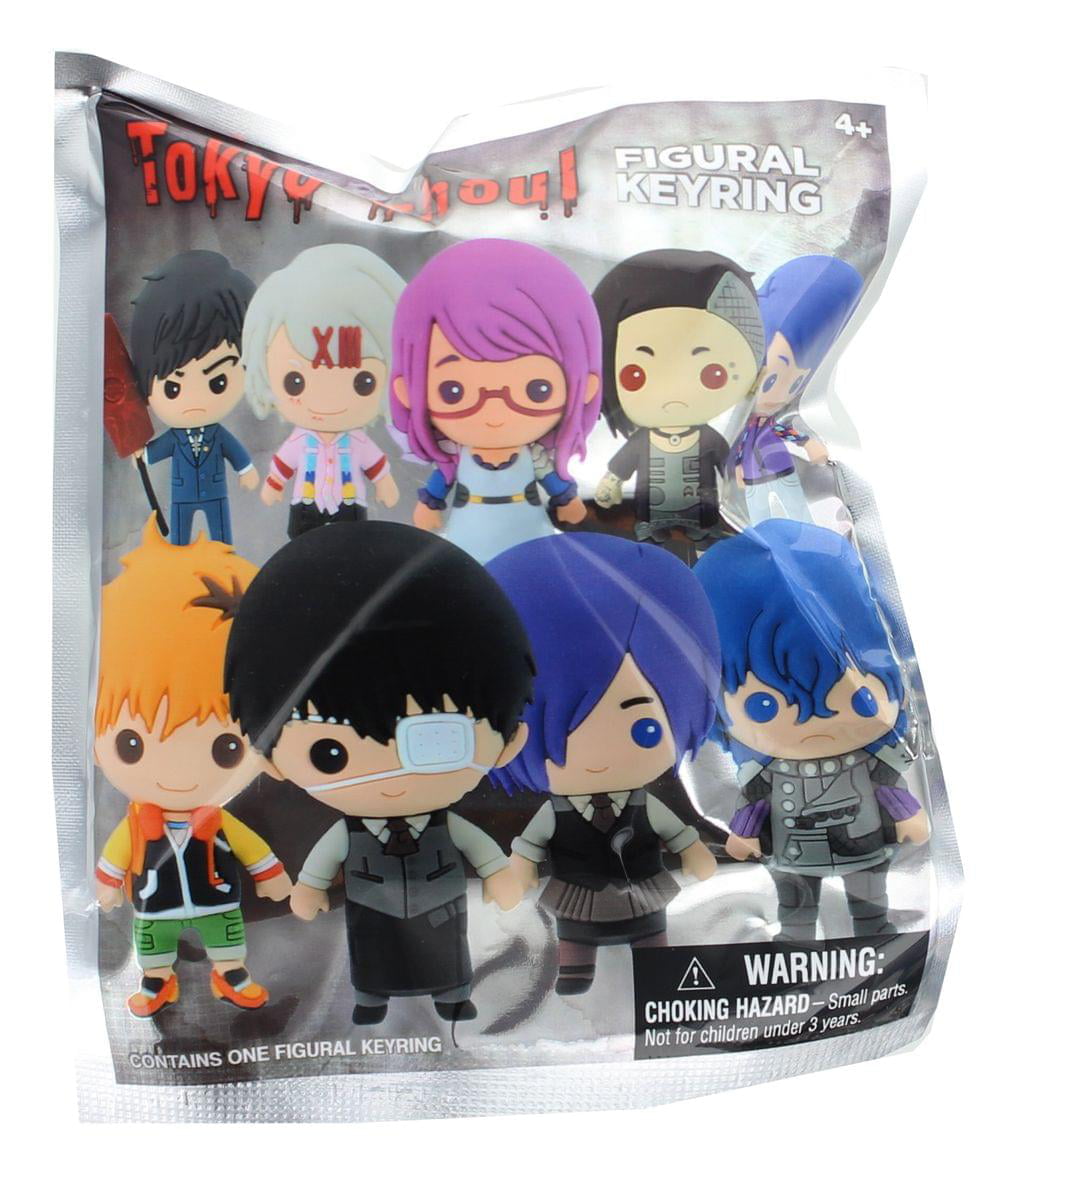 Bandai Tokyo Ghoul Capsule Rubber Strap Pucchi Keychain Key chain Swing Figure 